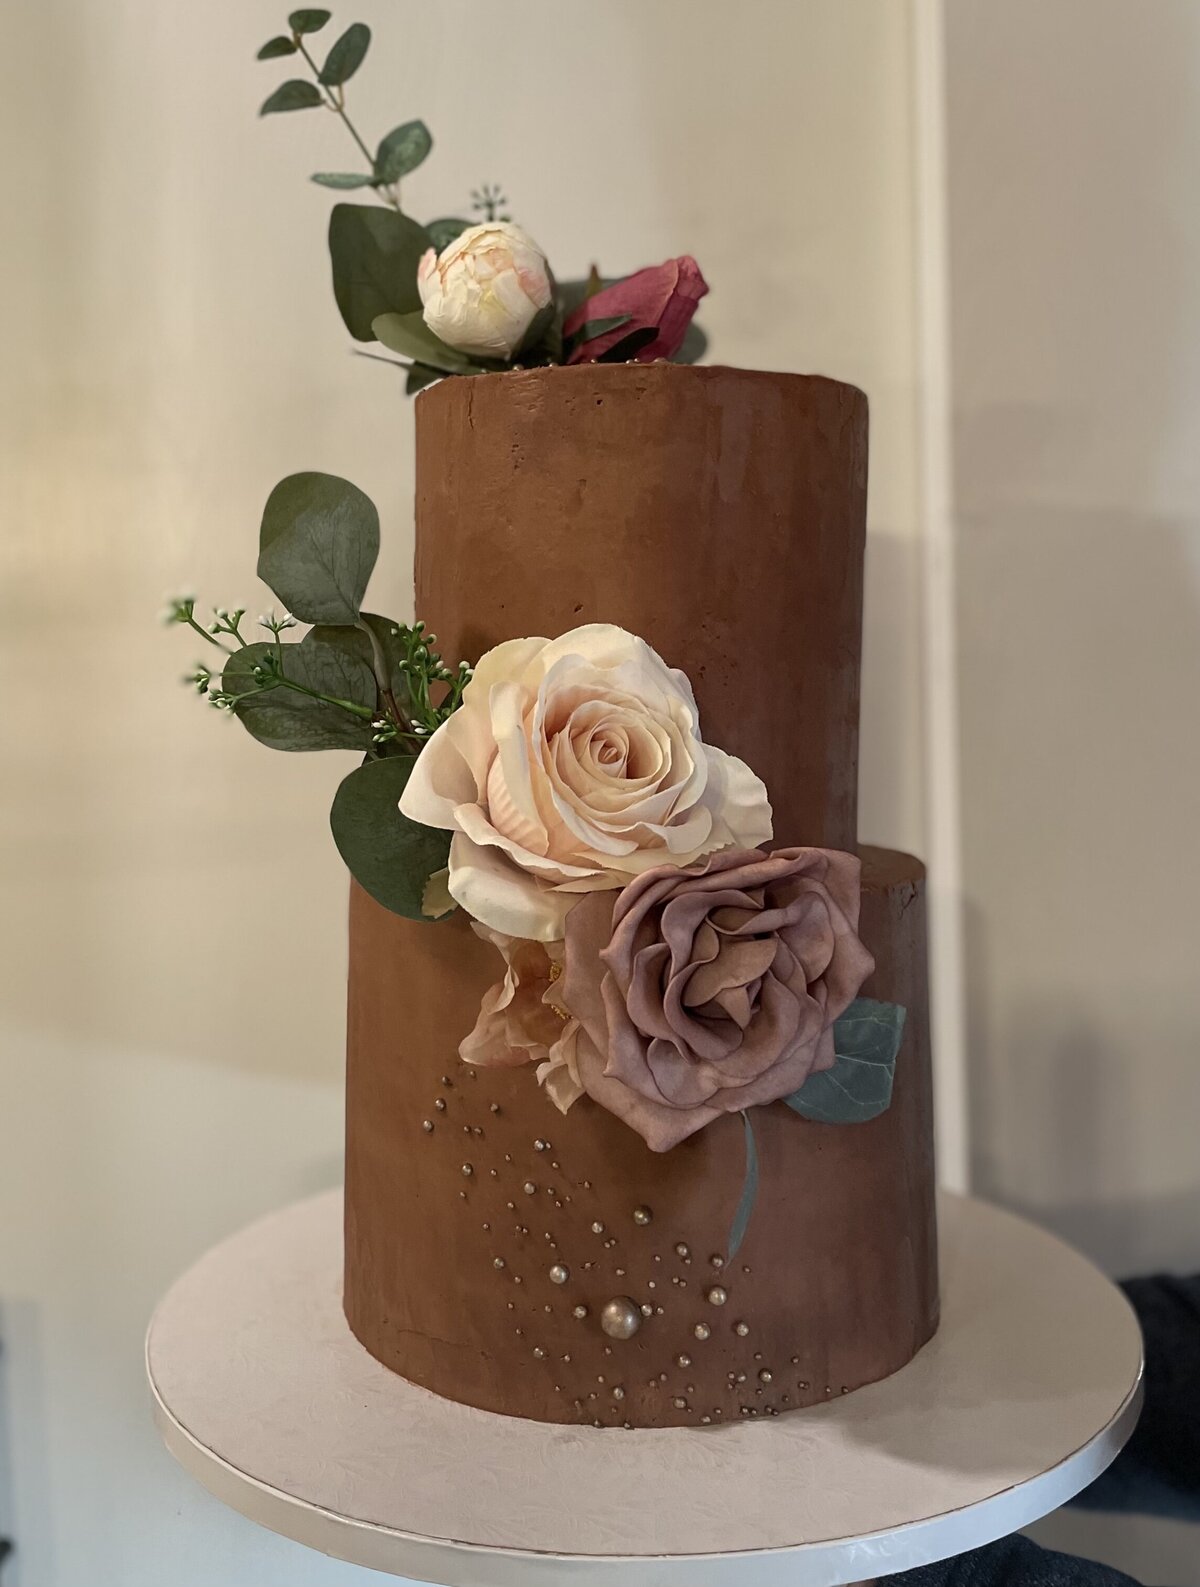 Elegant two-tier wedding cake decorated with fresh flowers, created in Gilbert, AZ